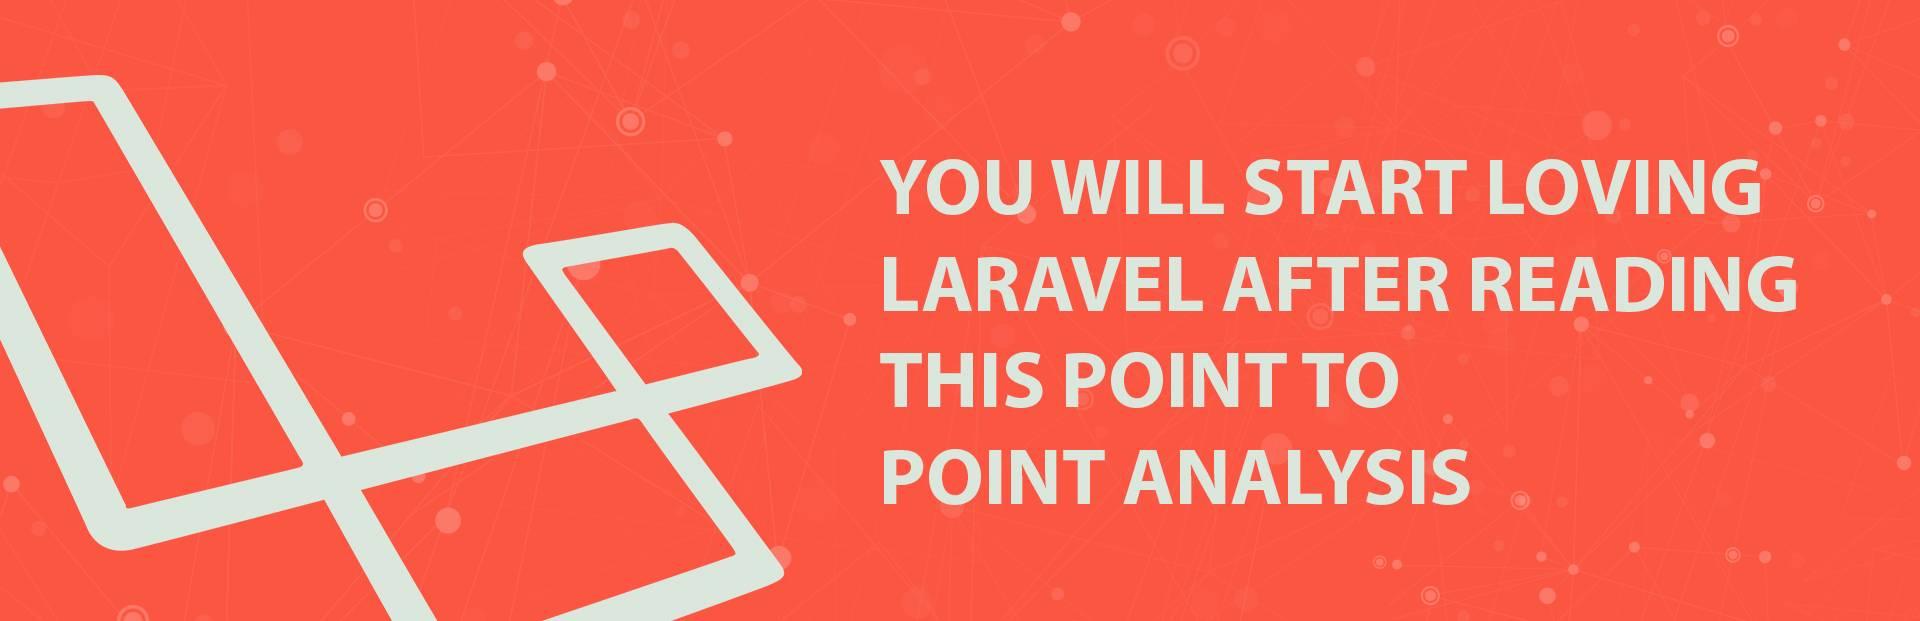 You will start loving Laravel after reading this point to point analysis